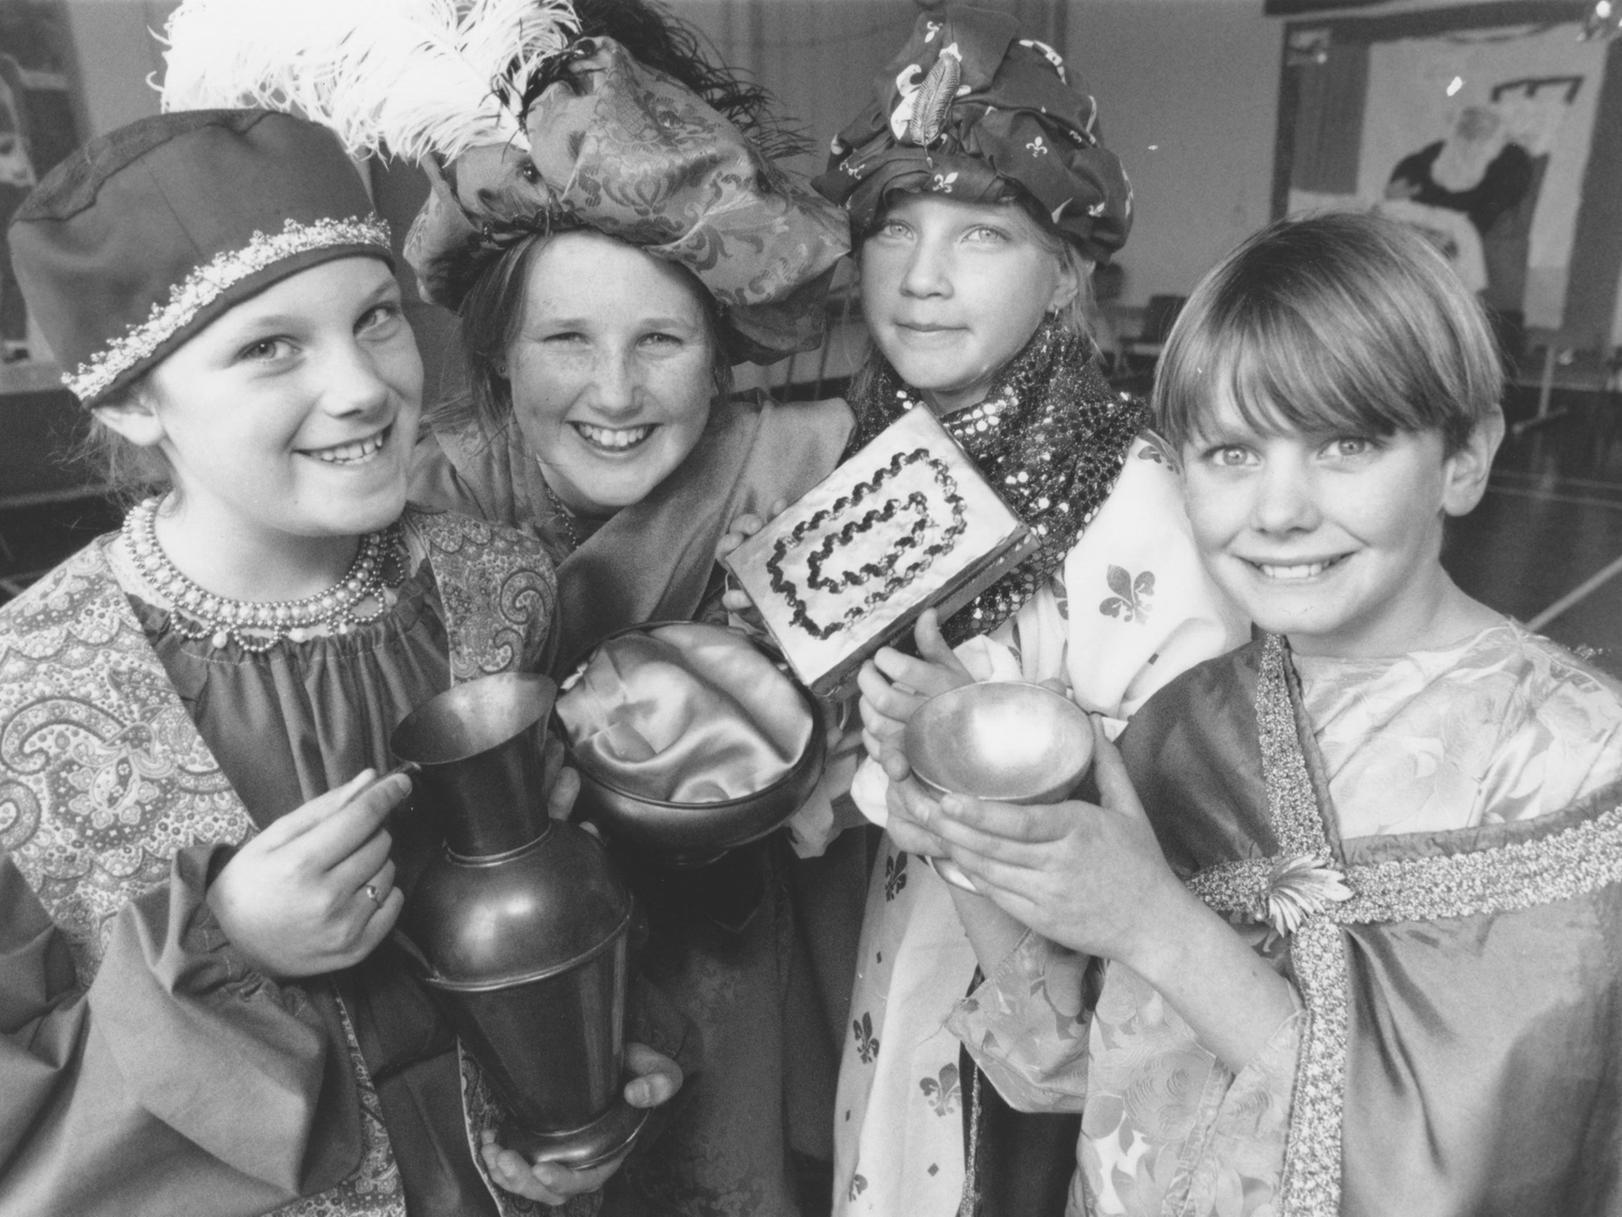 The Filey Junior School Christmas play of the Christmas Dove and the Woodcutter was underway in December 1997. Pictured are the Four Kings, left to right, Rebecca Hunter, Claire Ryan, Claire Appleyard, and Alex Smith.